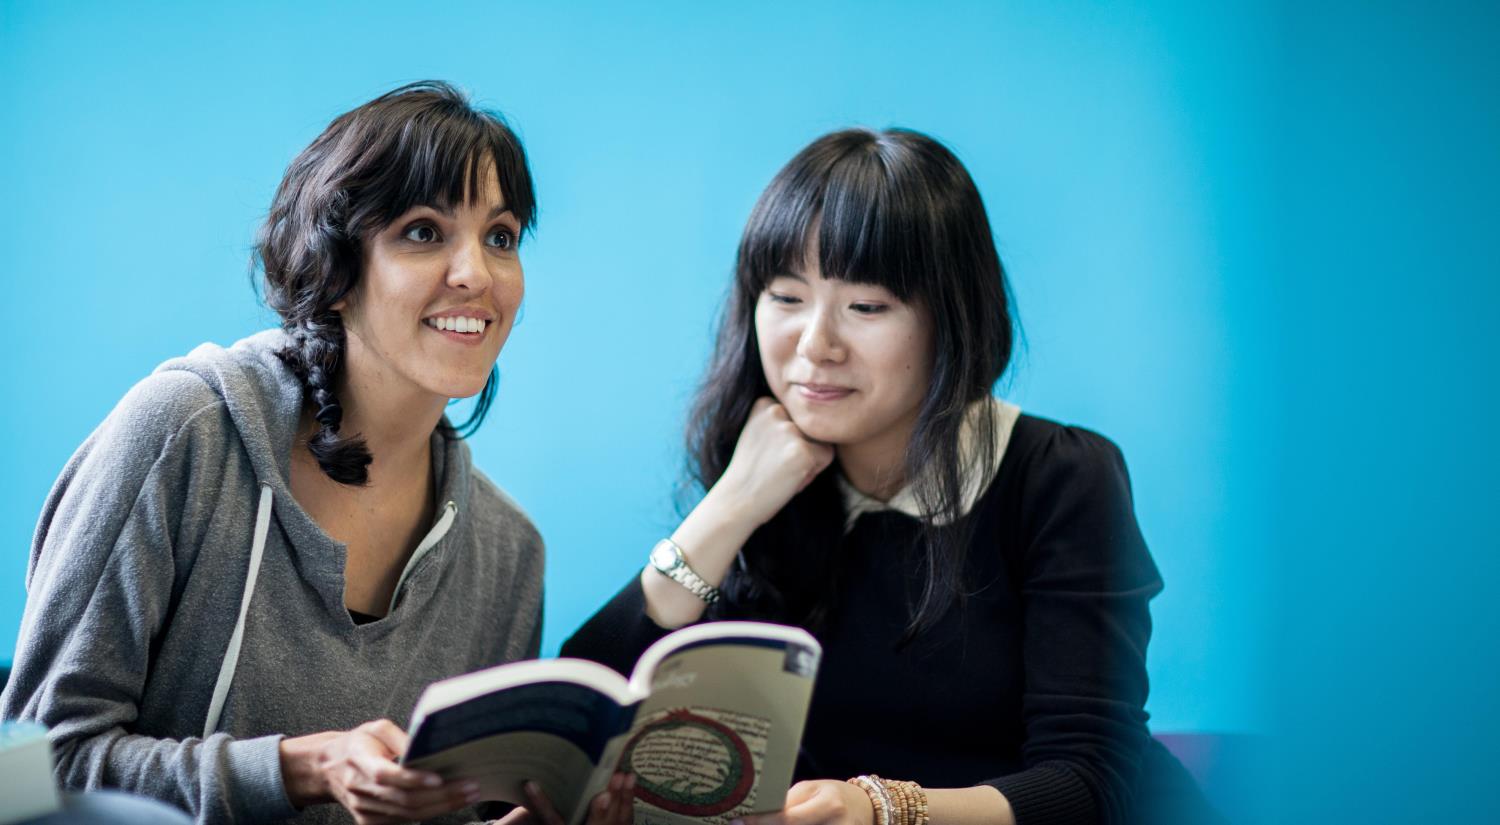 Two students peering over a book learning a language